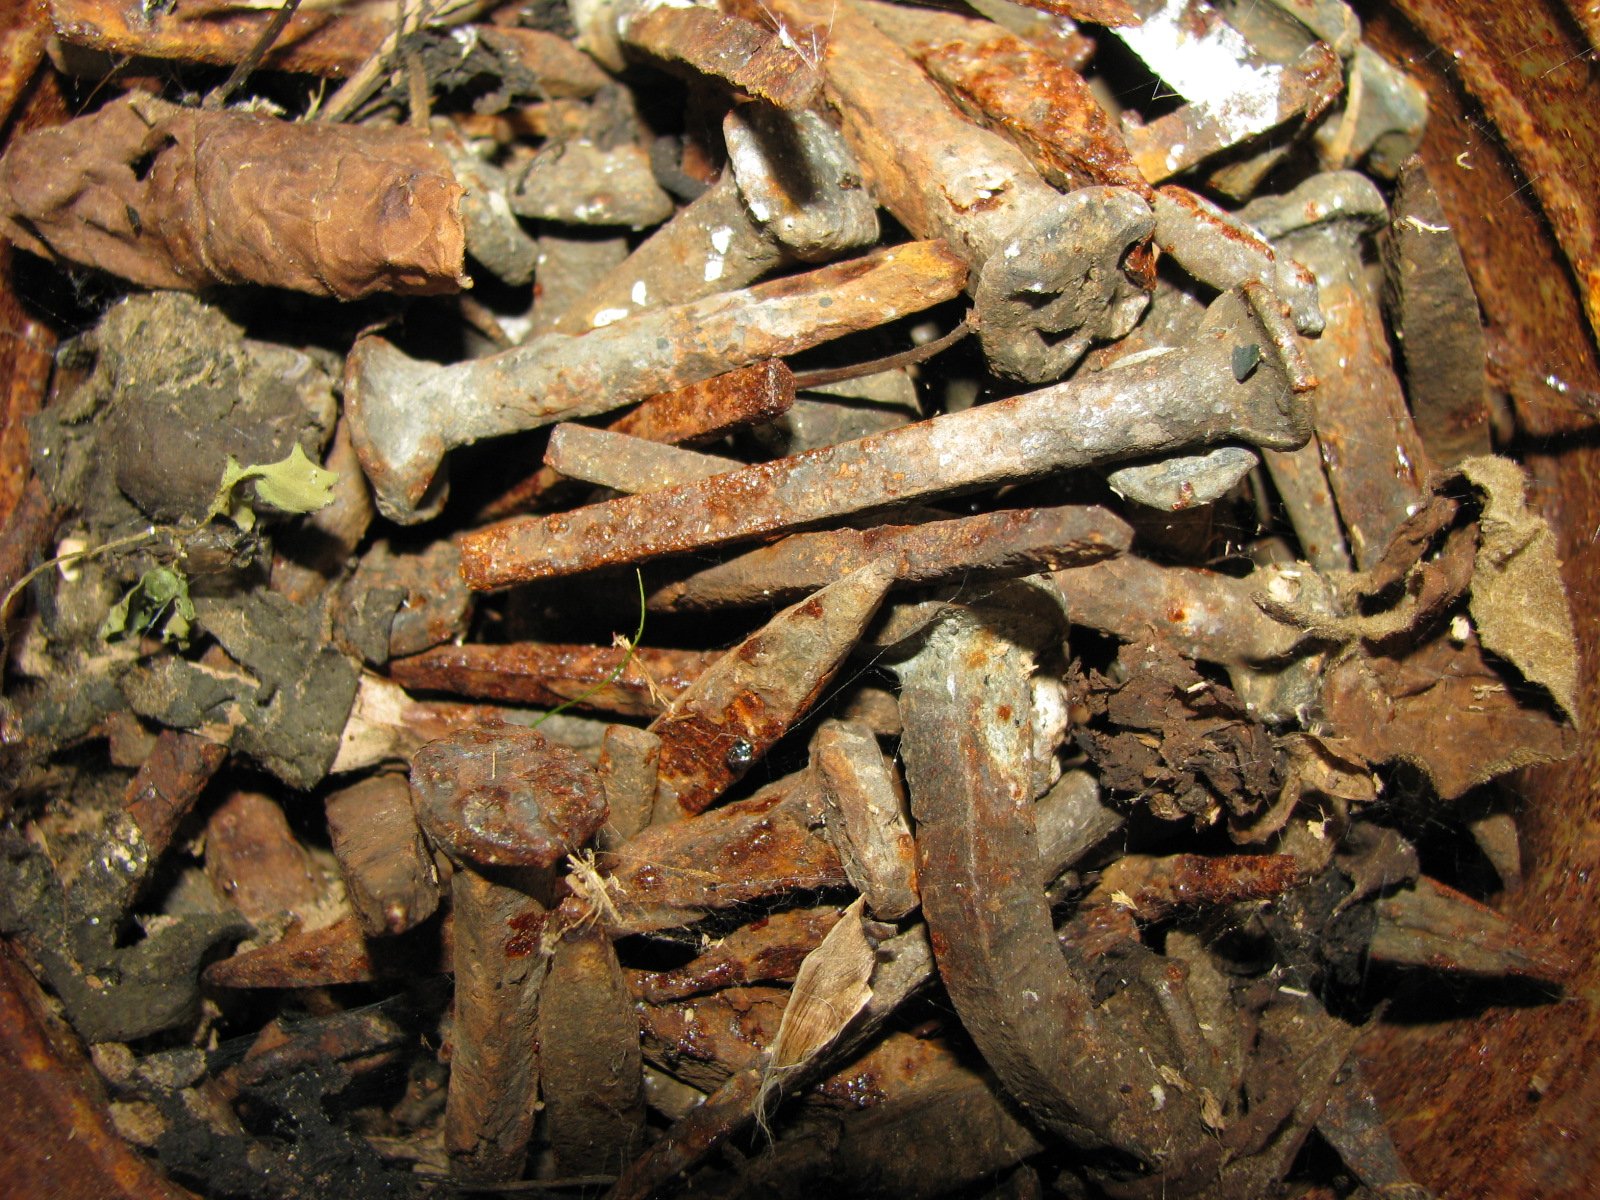 rusty pieces of metal are in an open container